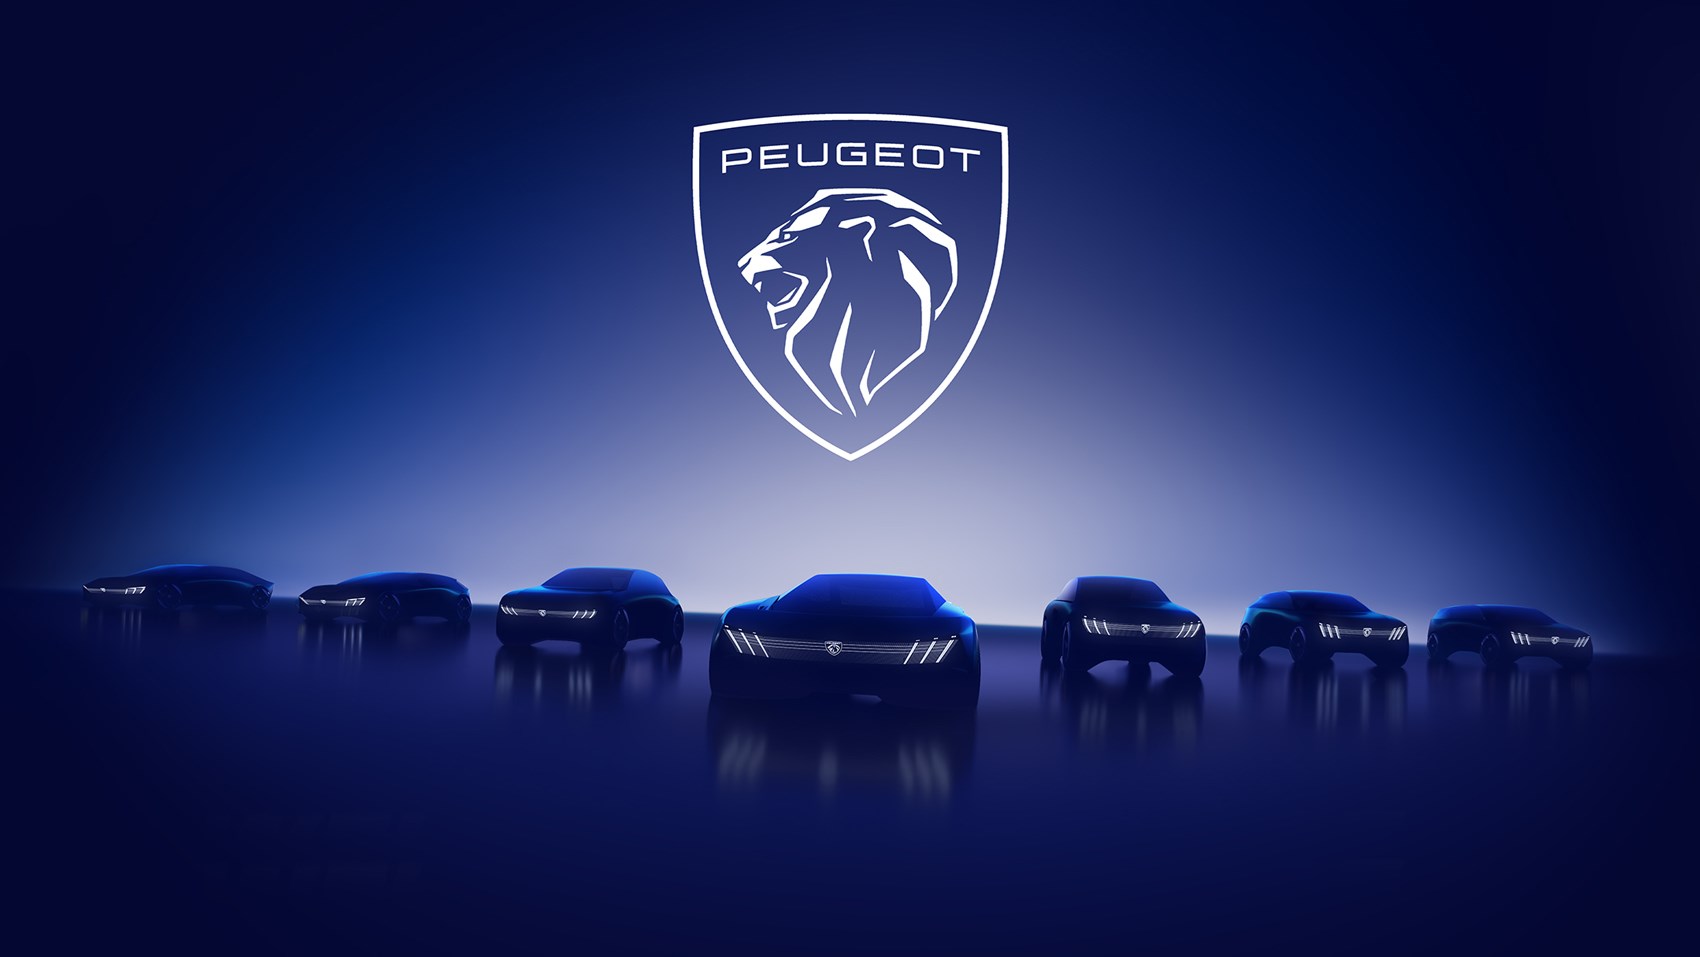 Peugeot removes lion's body from logo for first time in almost 50 years